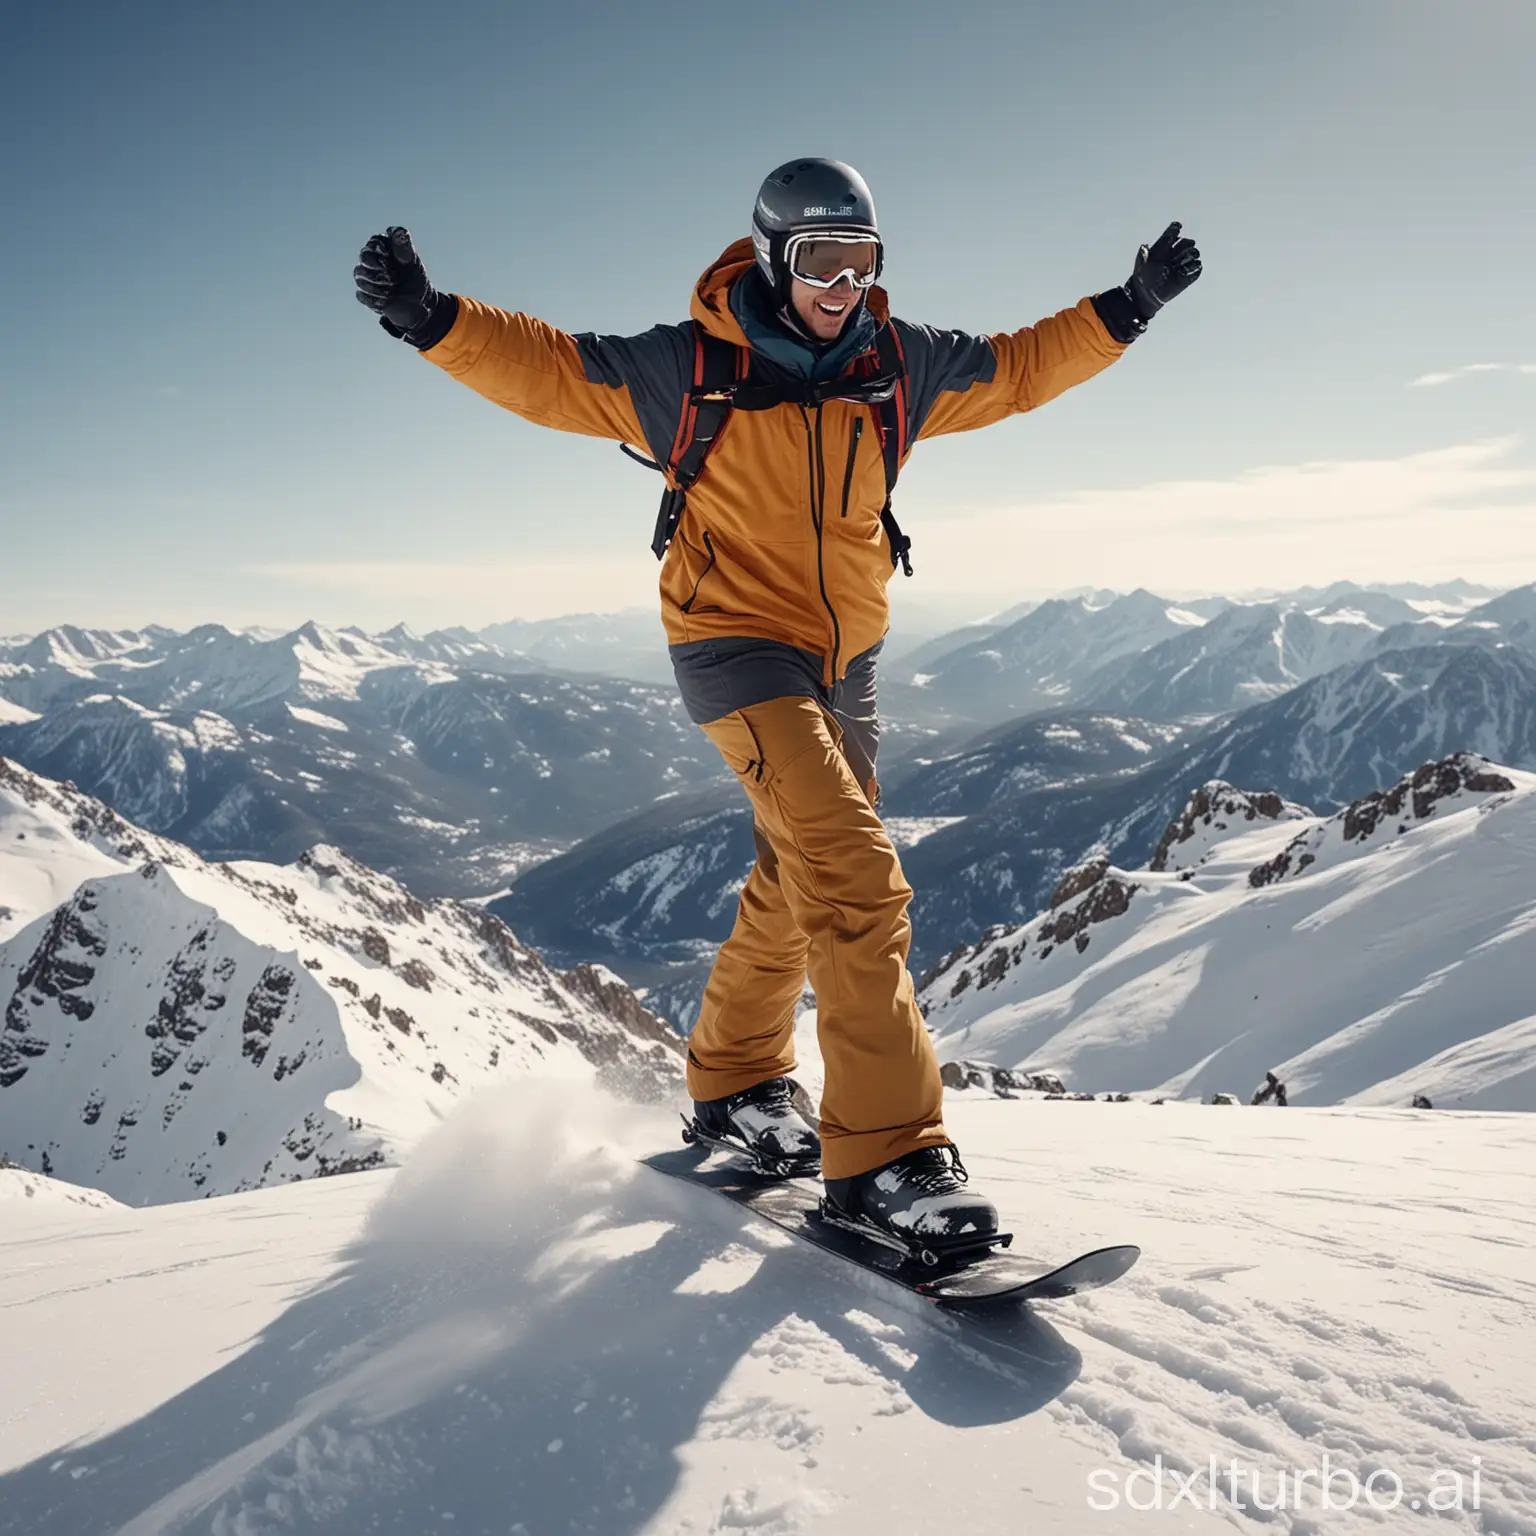 An American young man is wearing ski equipment. He is riding a snowboard with his feet on the snowboard. He is skiing on the snowy mountain in a downward swooping posture, with his hands in the air to control the direction. He's all dressed up, top notch, super confident, ultra HD, 8K, detailed, high quality.